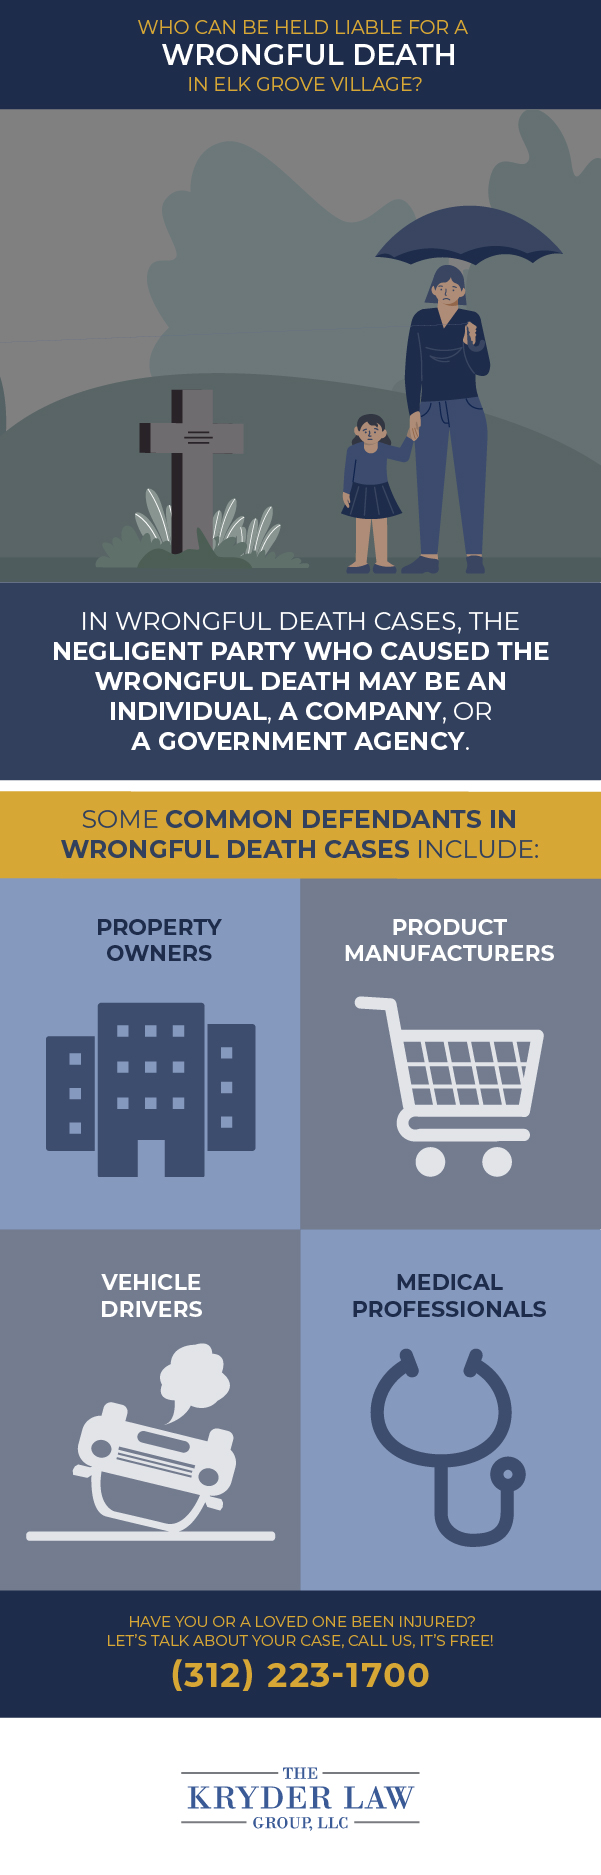 Who Can Be Held Liable for a Wrongful Death in Elk Grove Village?